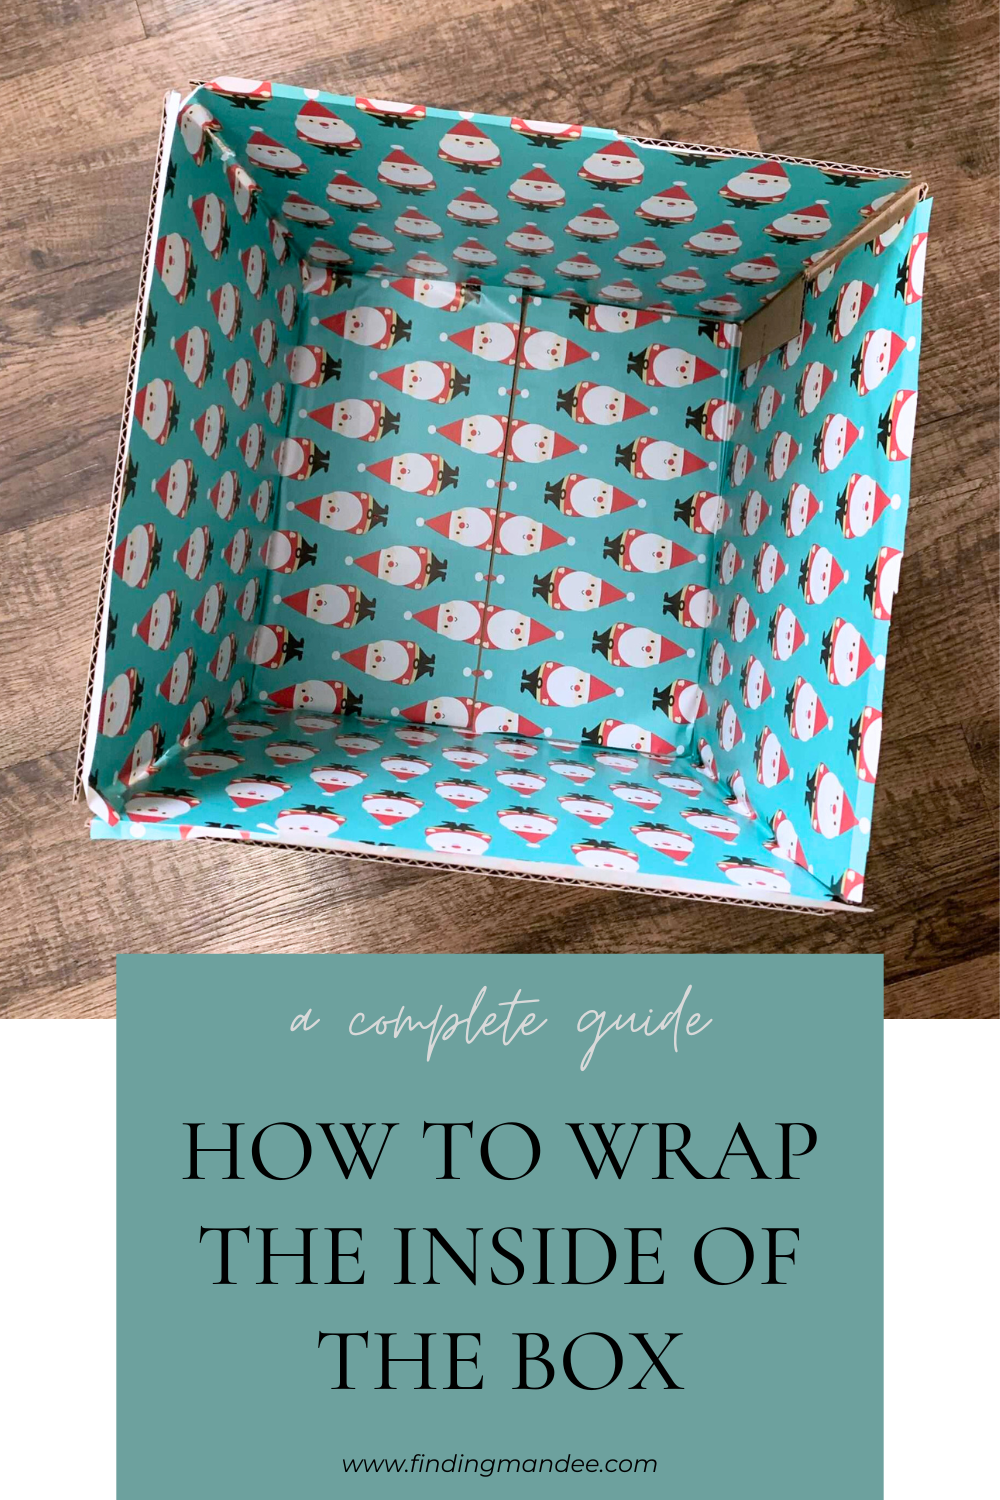 How to Wrap the Inside of the Box | Finding Mandee